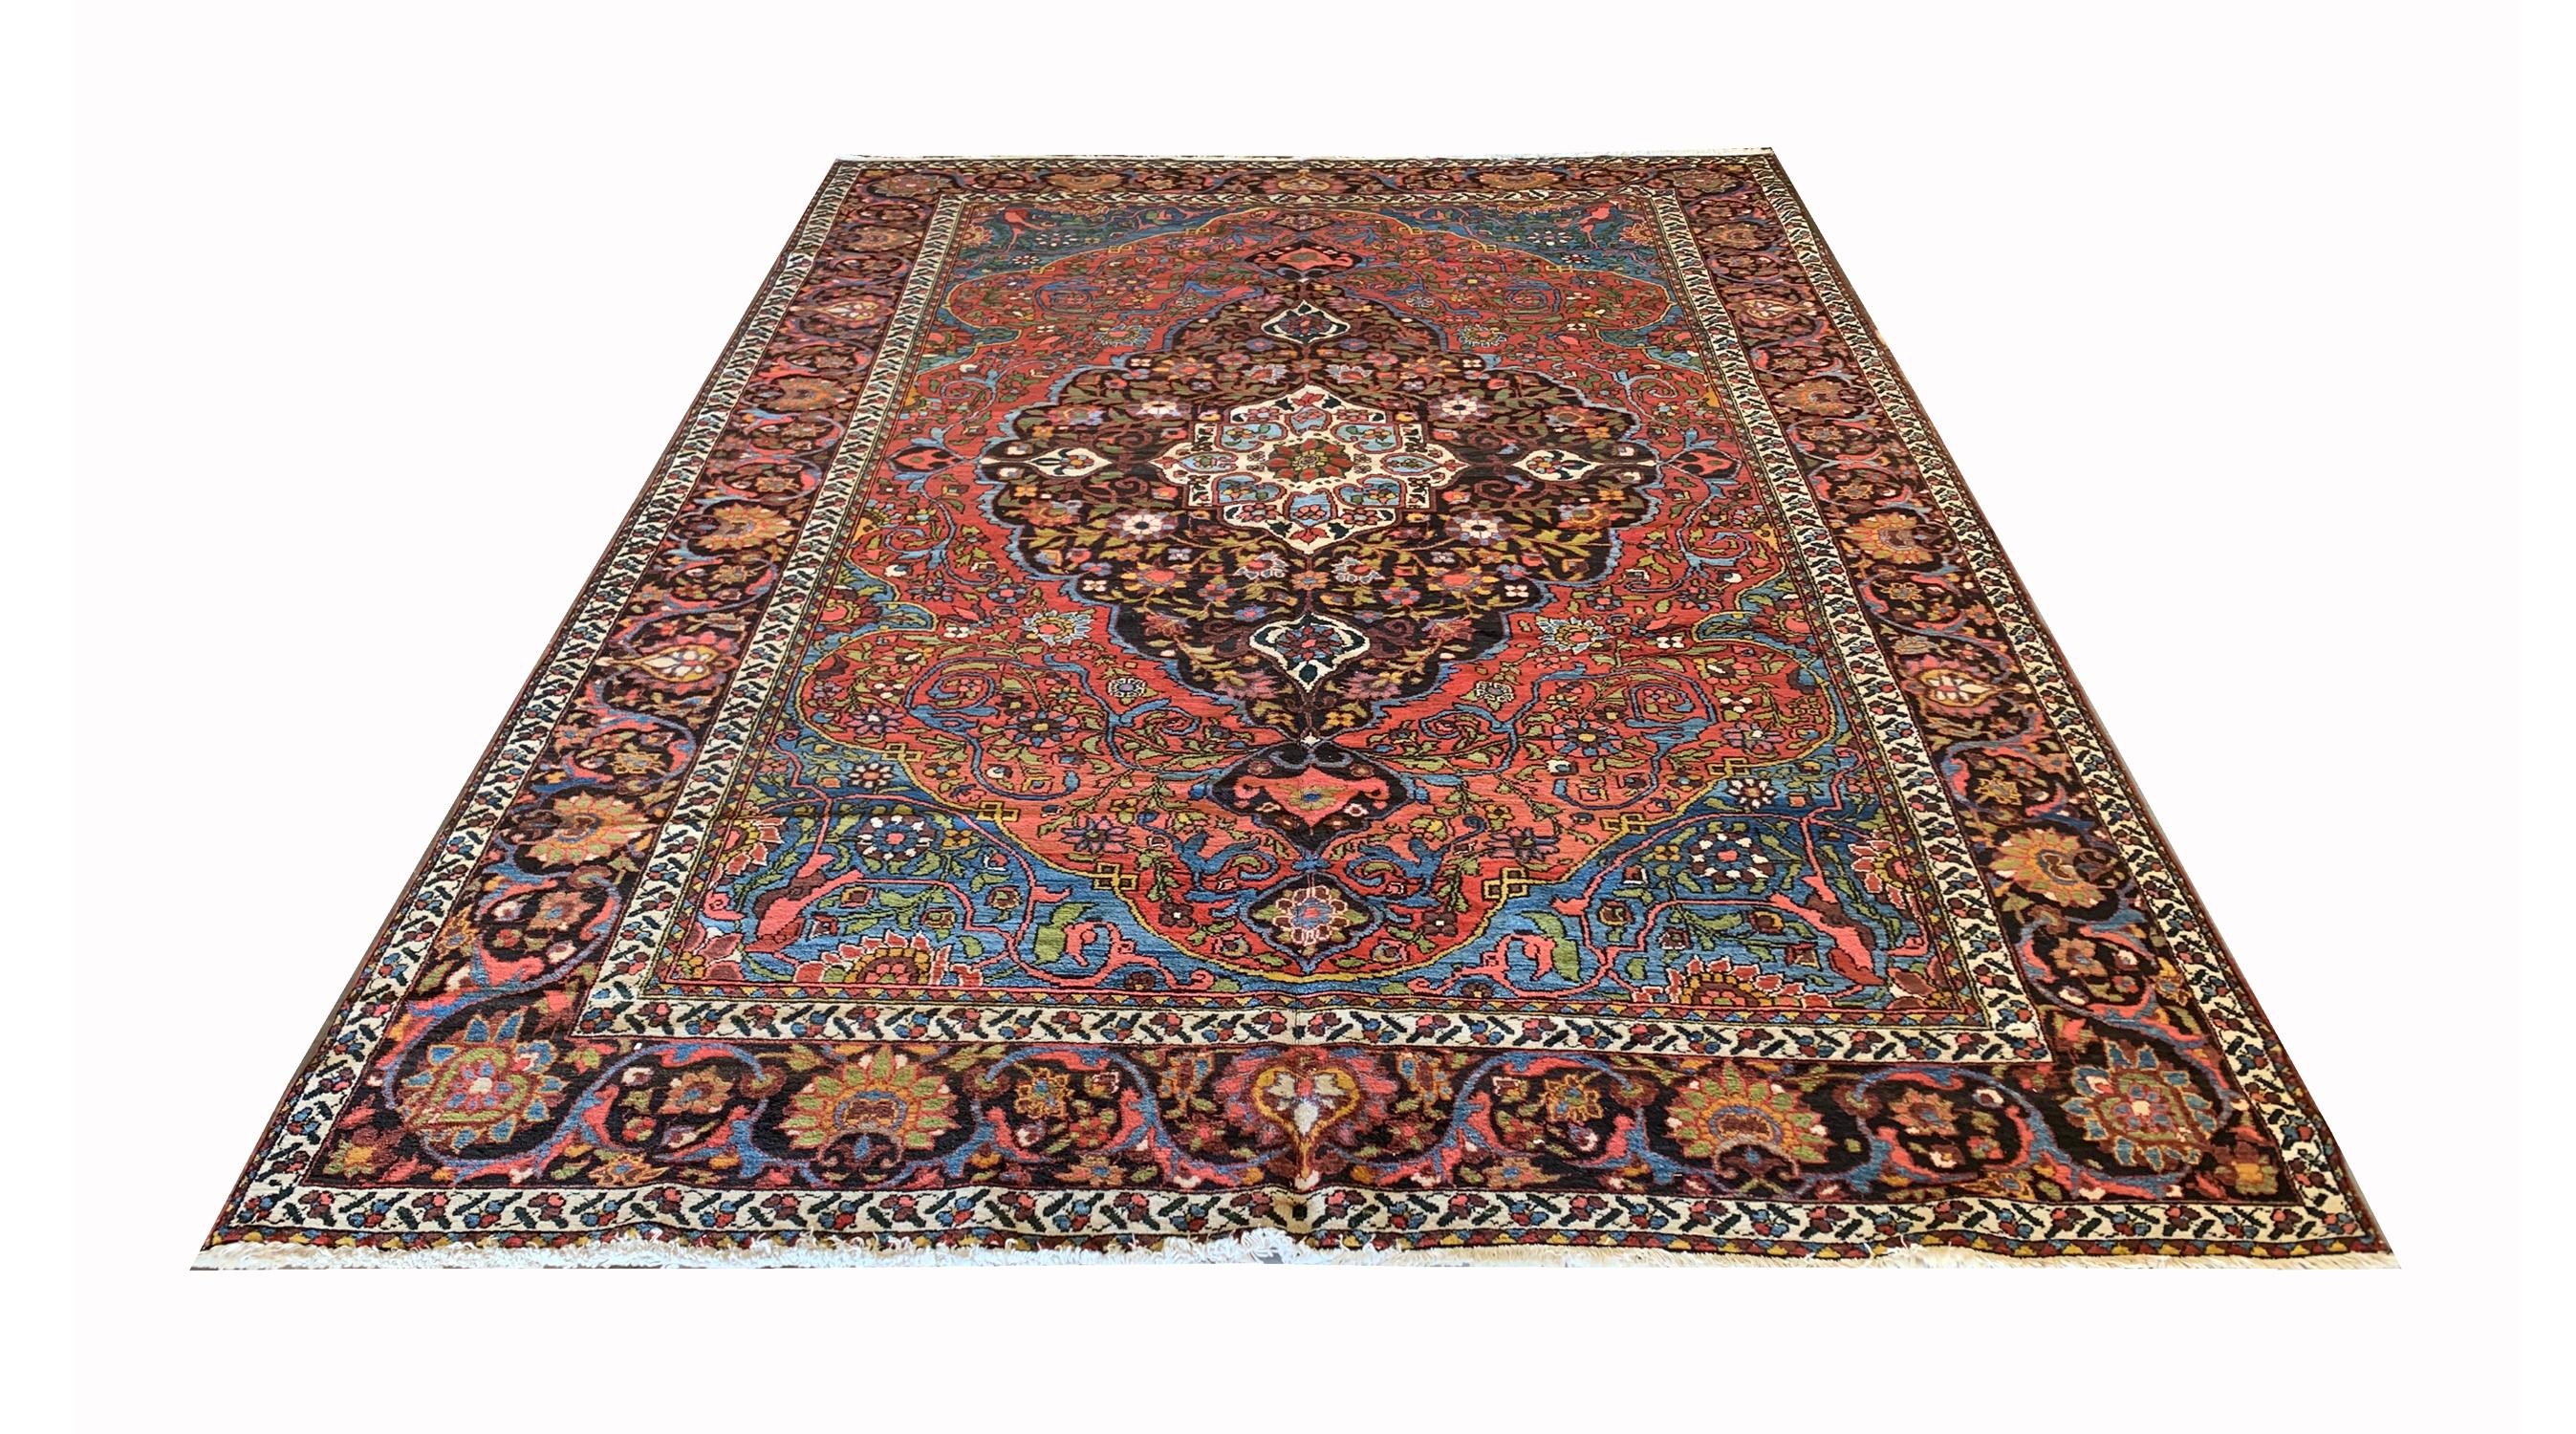 This traditional antique medallion carpet is a handwoven masterpiece constructed in the 1900s. Displaying a Magnificent medallion and highly decorative surrounding composition. Symmetrically woven with flowing floral scrolls and a striking colour